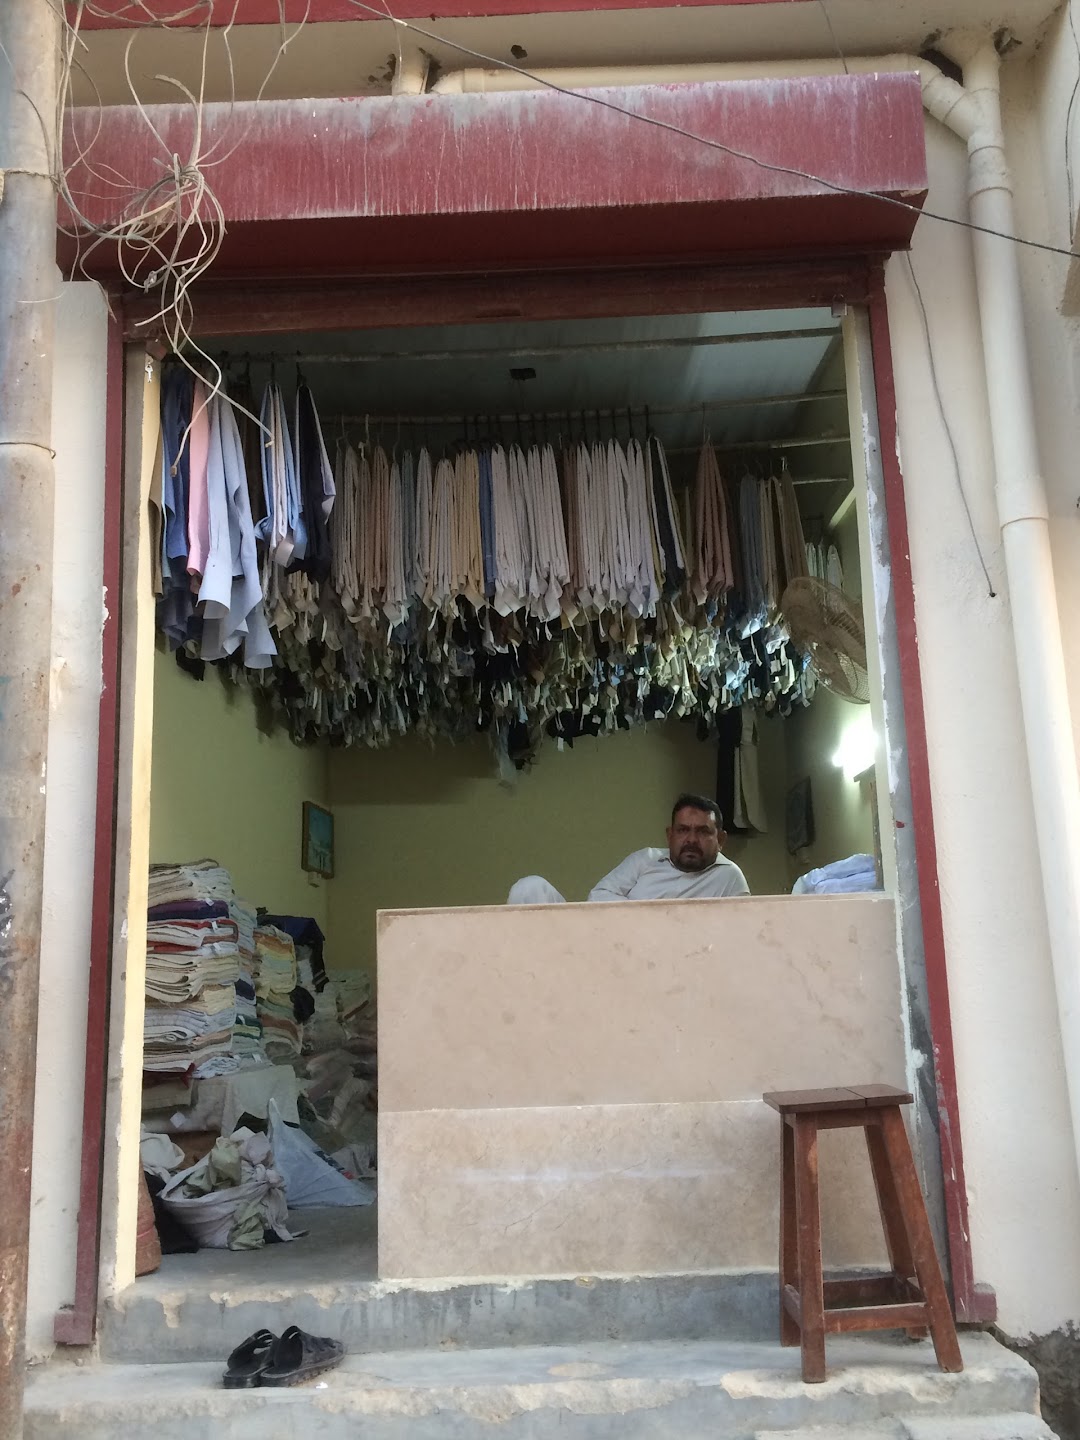 PUNJAB DRY CLEANERS